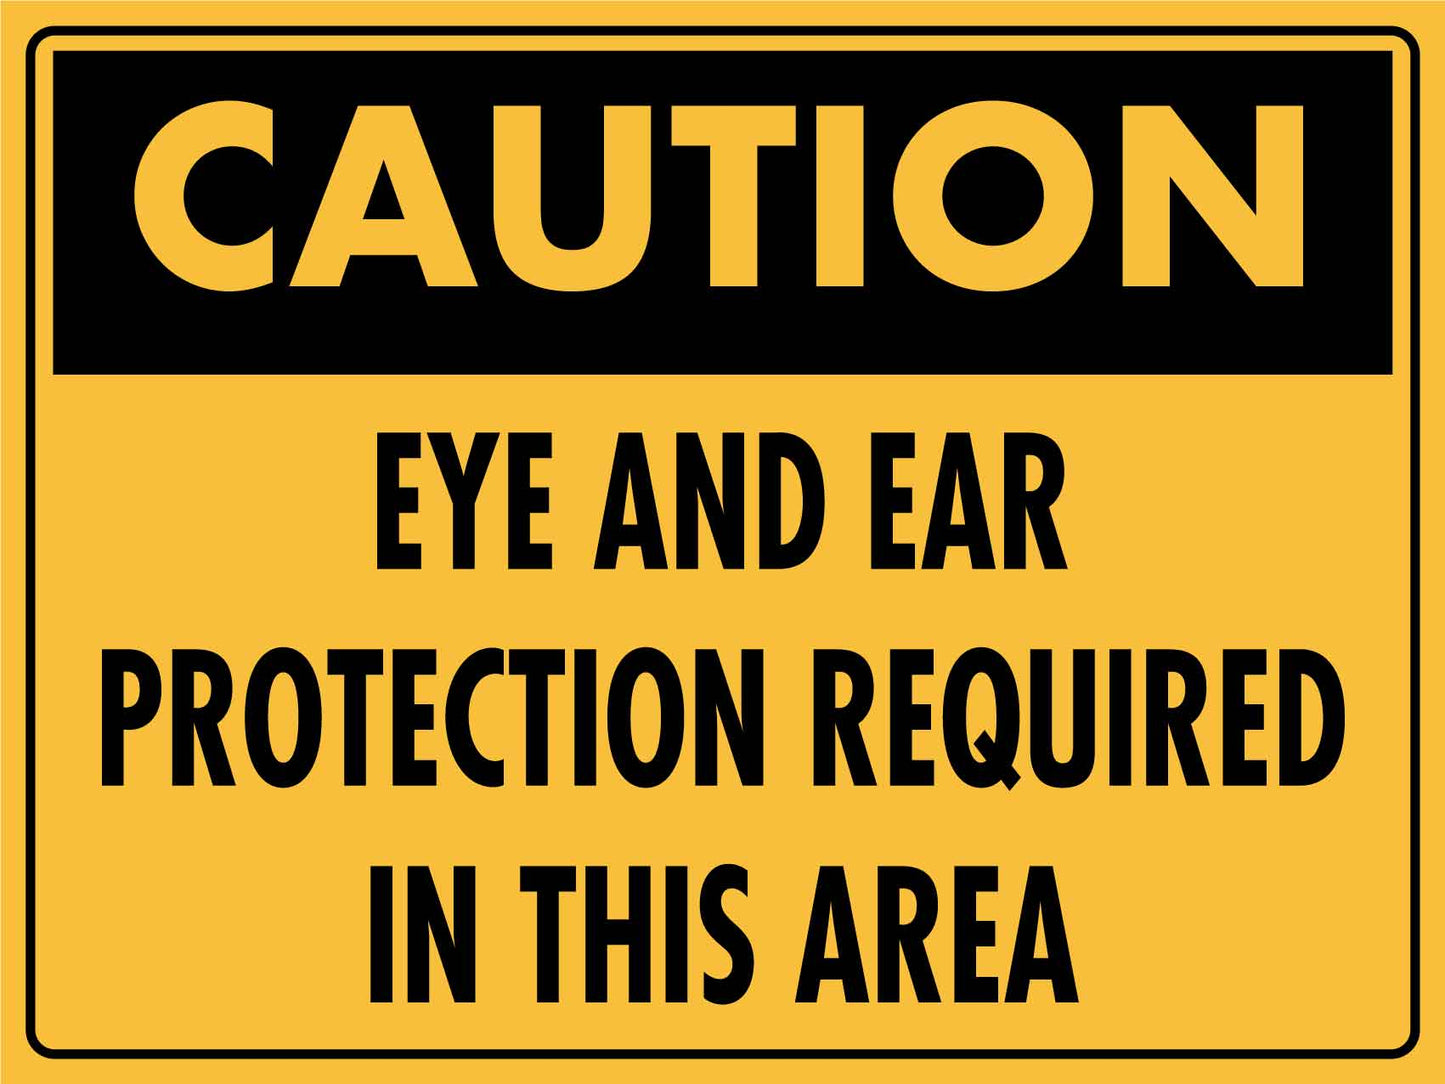 Caution Eye and Ear Protection Required in this Area Sign